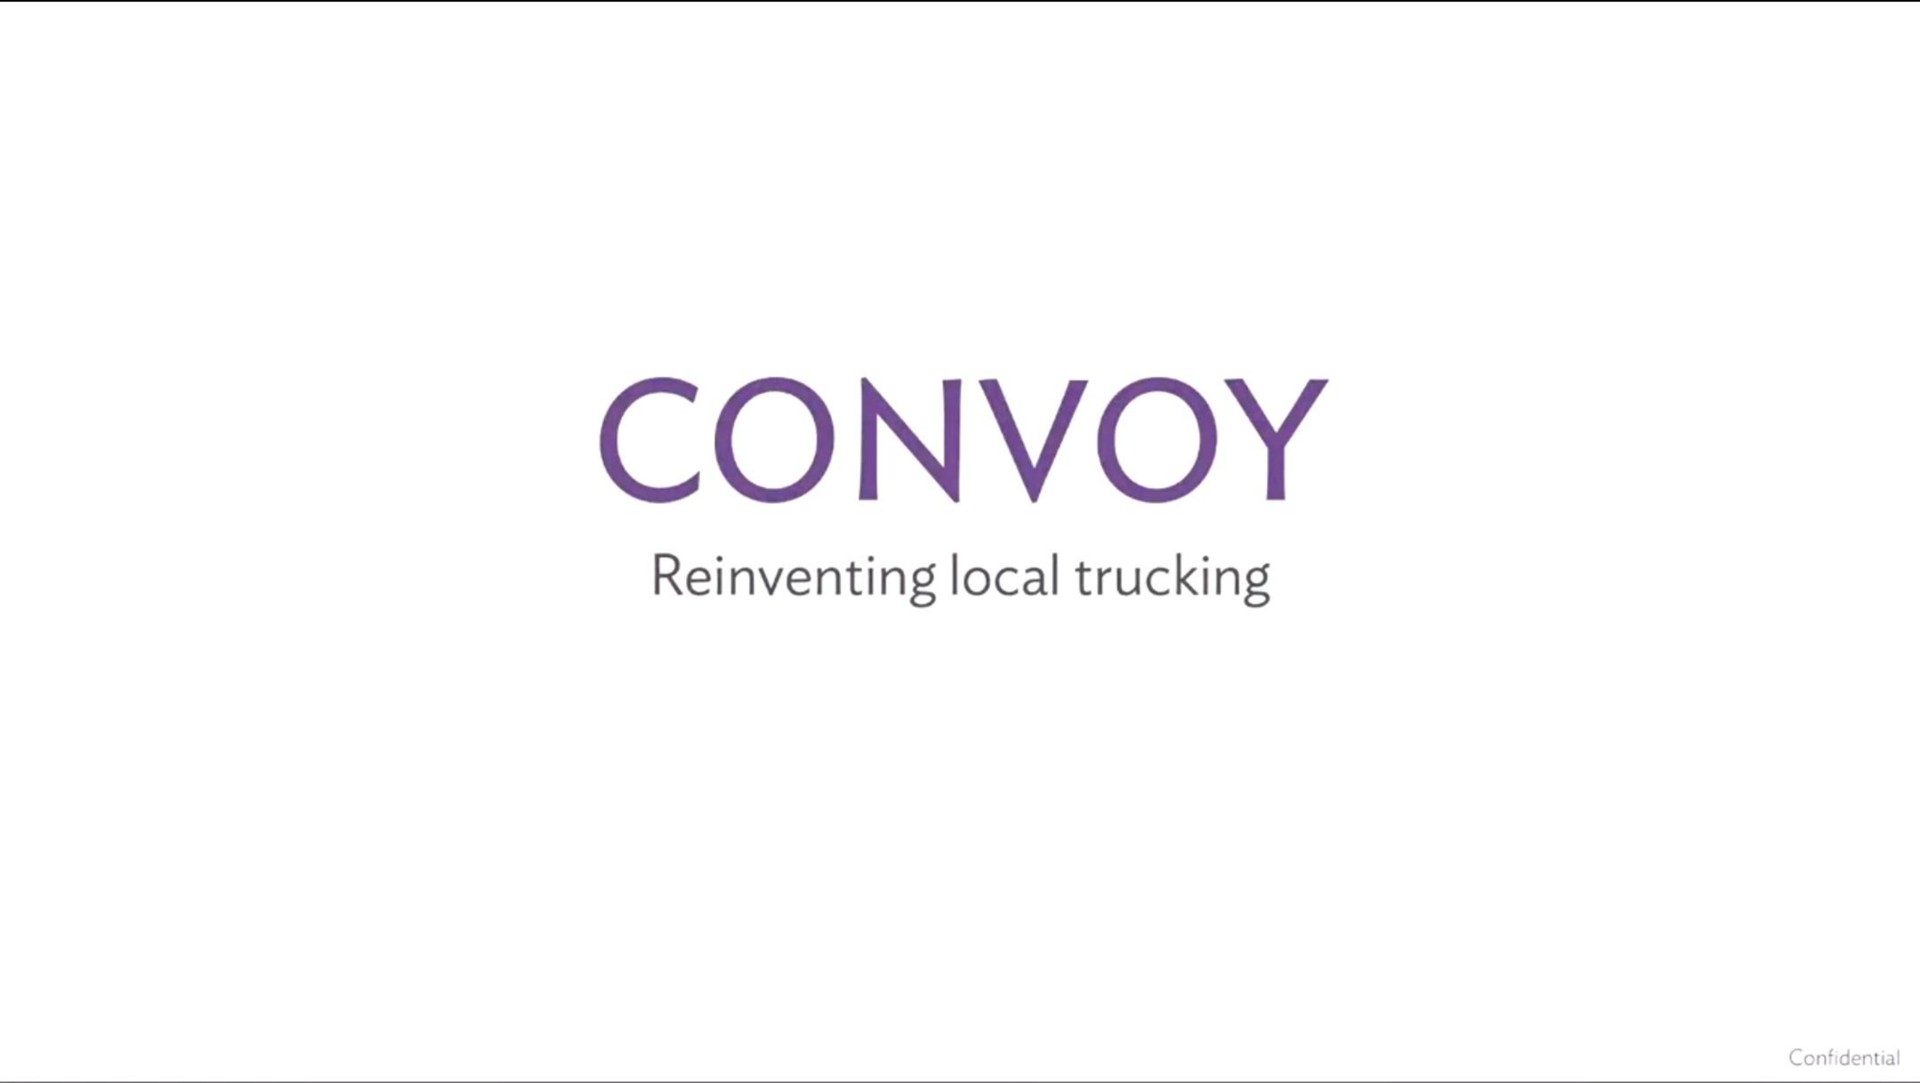 convoy reinventing local trucking | Convoy